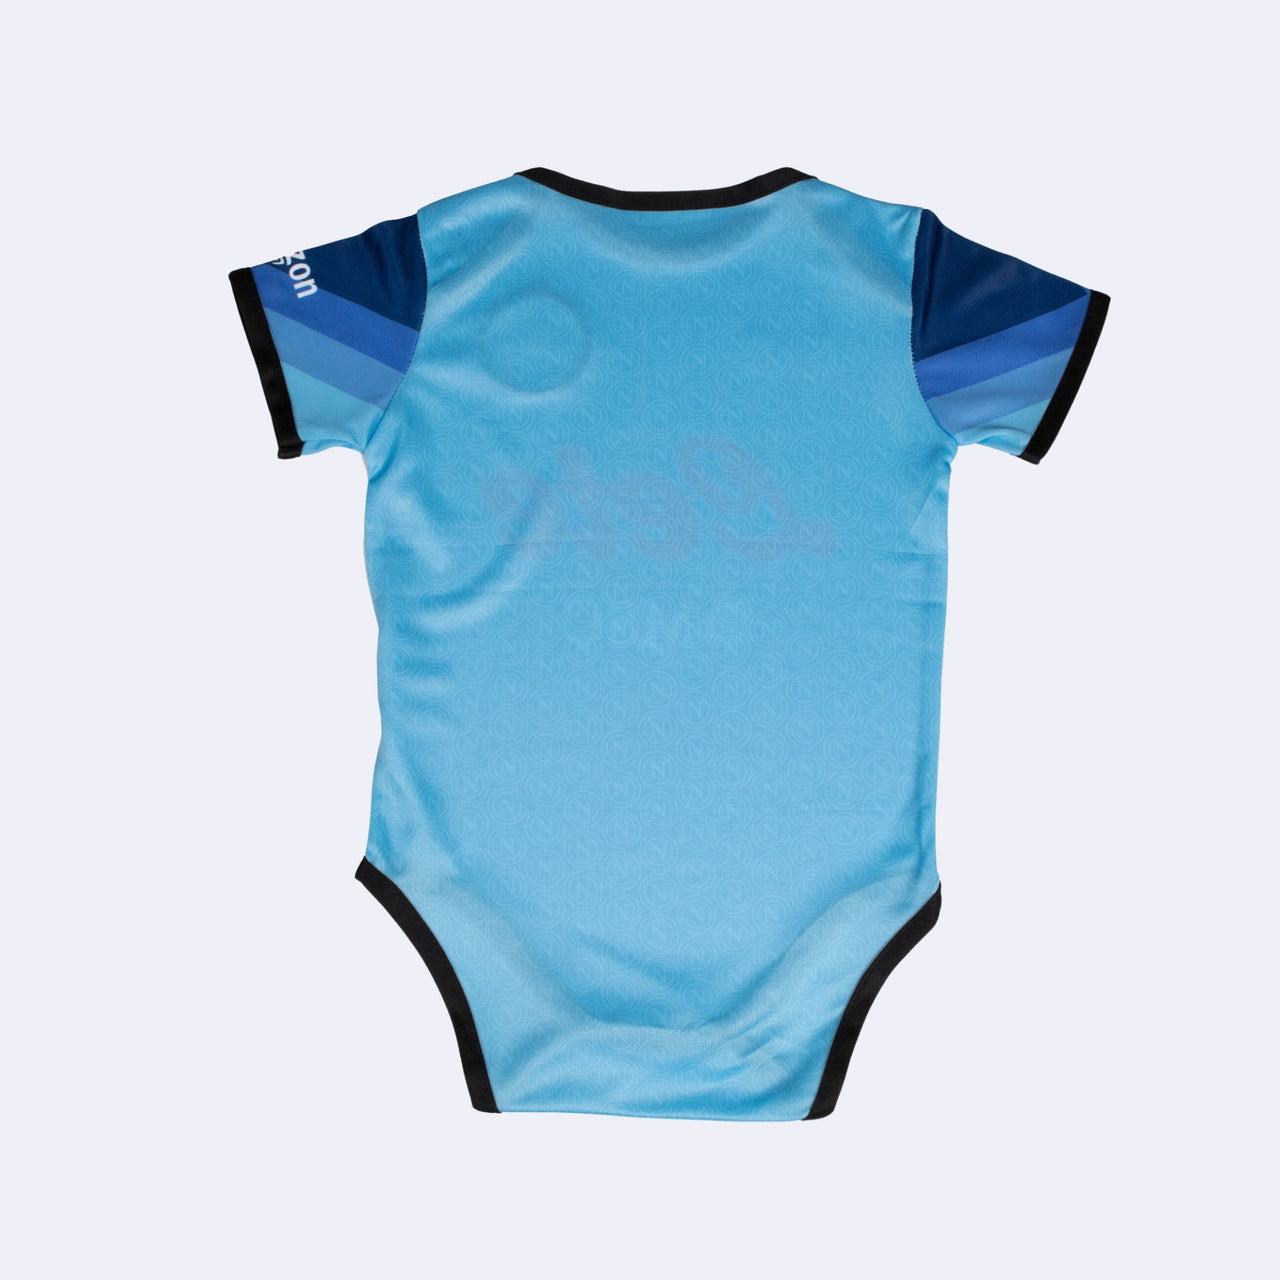 Napoli Baby Home Jersey